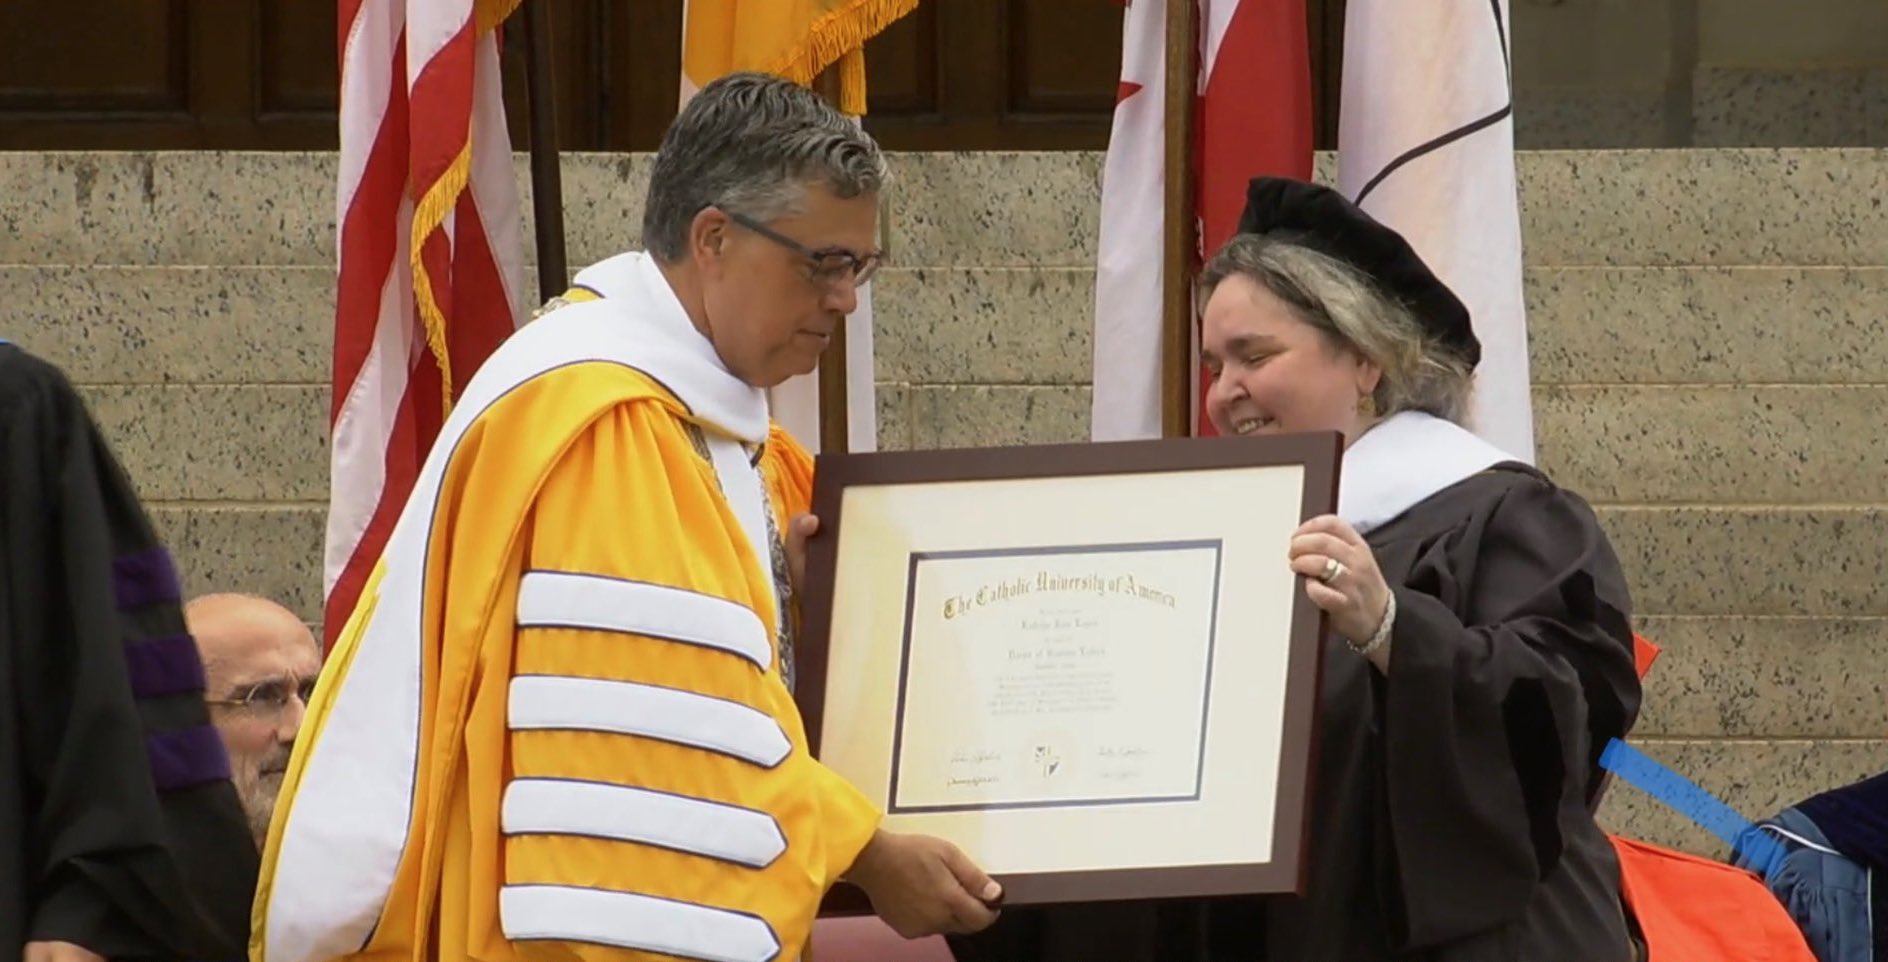 Featured image for “RFI Senior Fellow Receives Honorary Doctorate from The Catholic University of America”